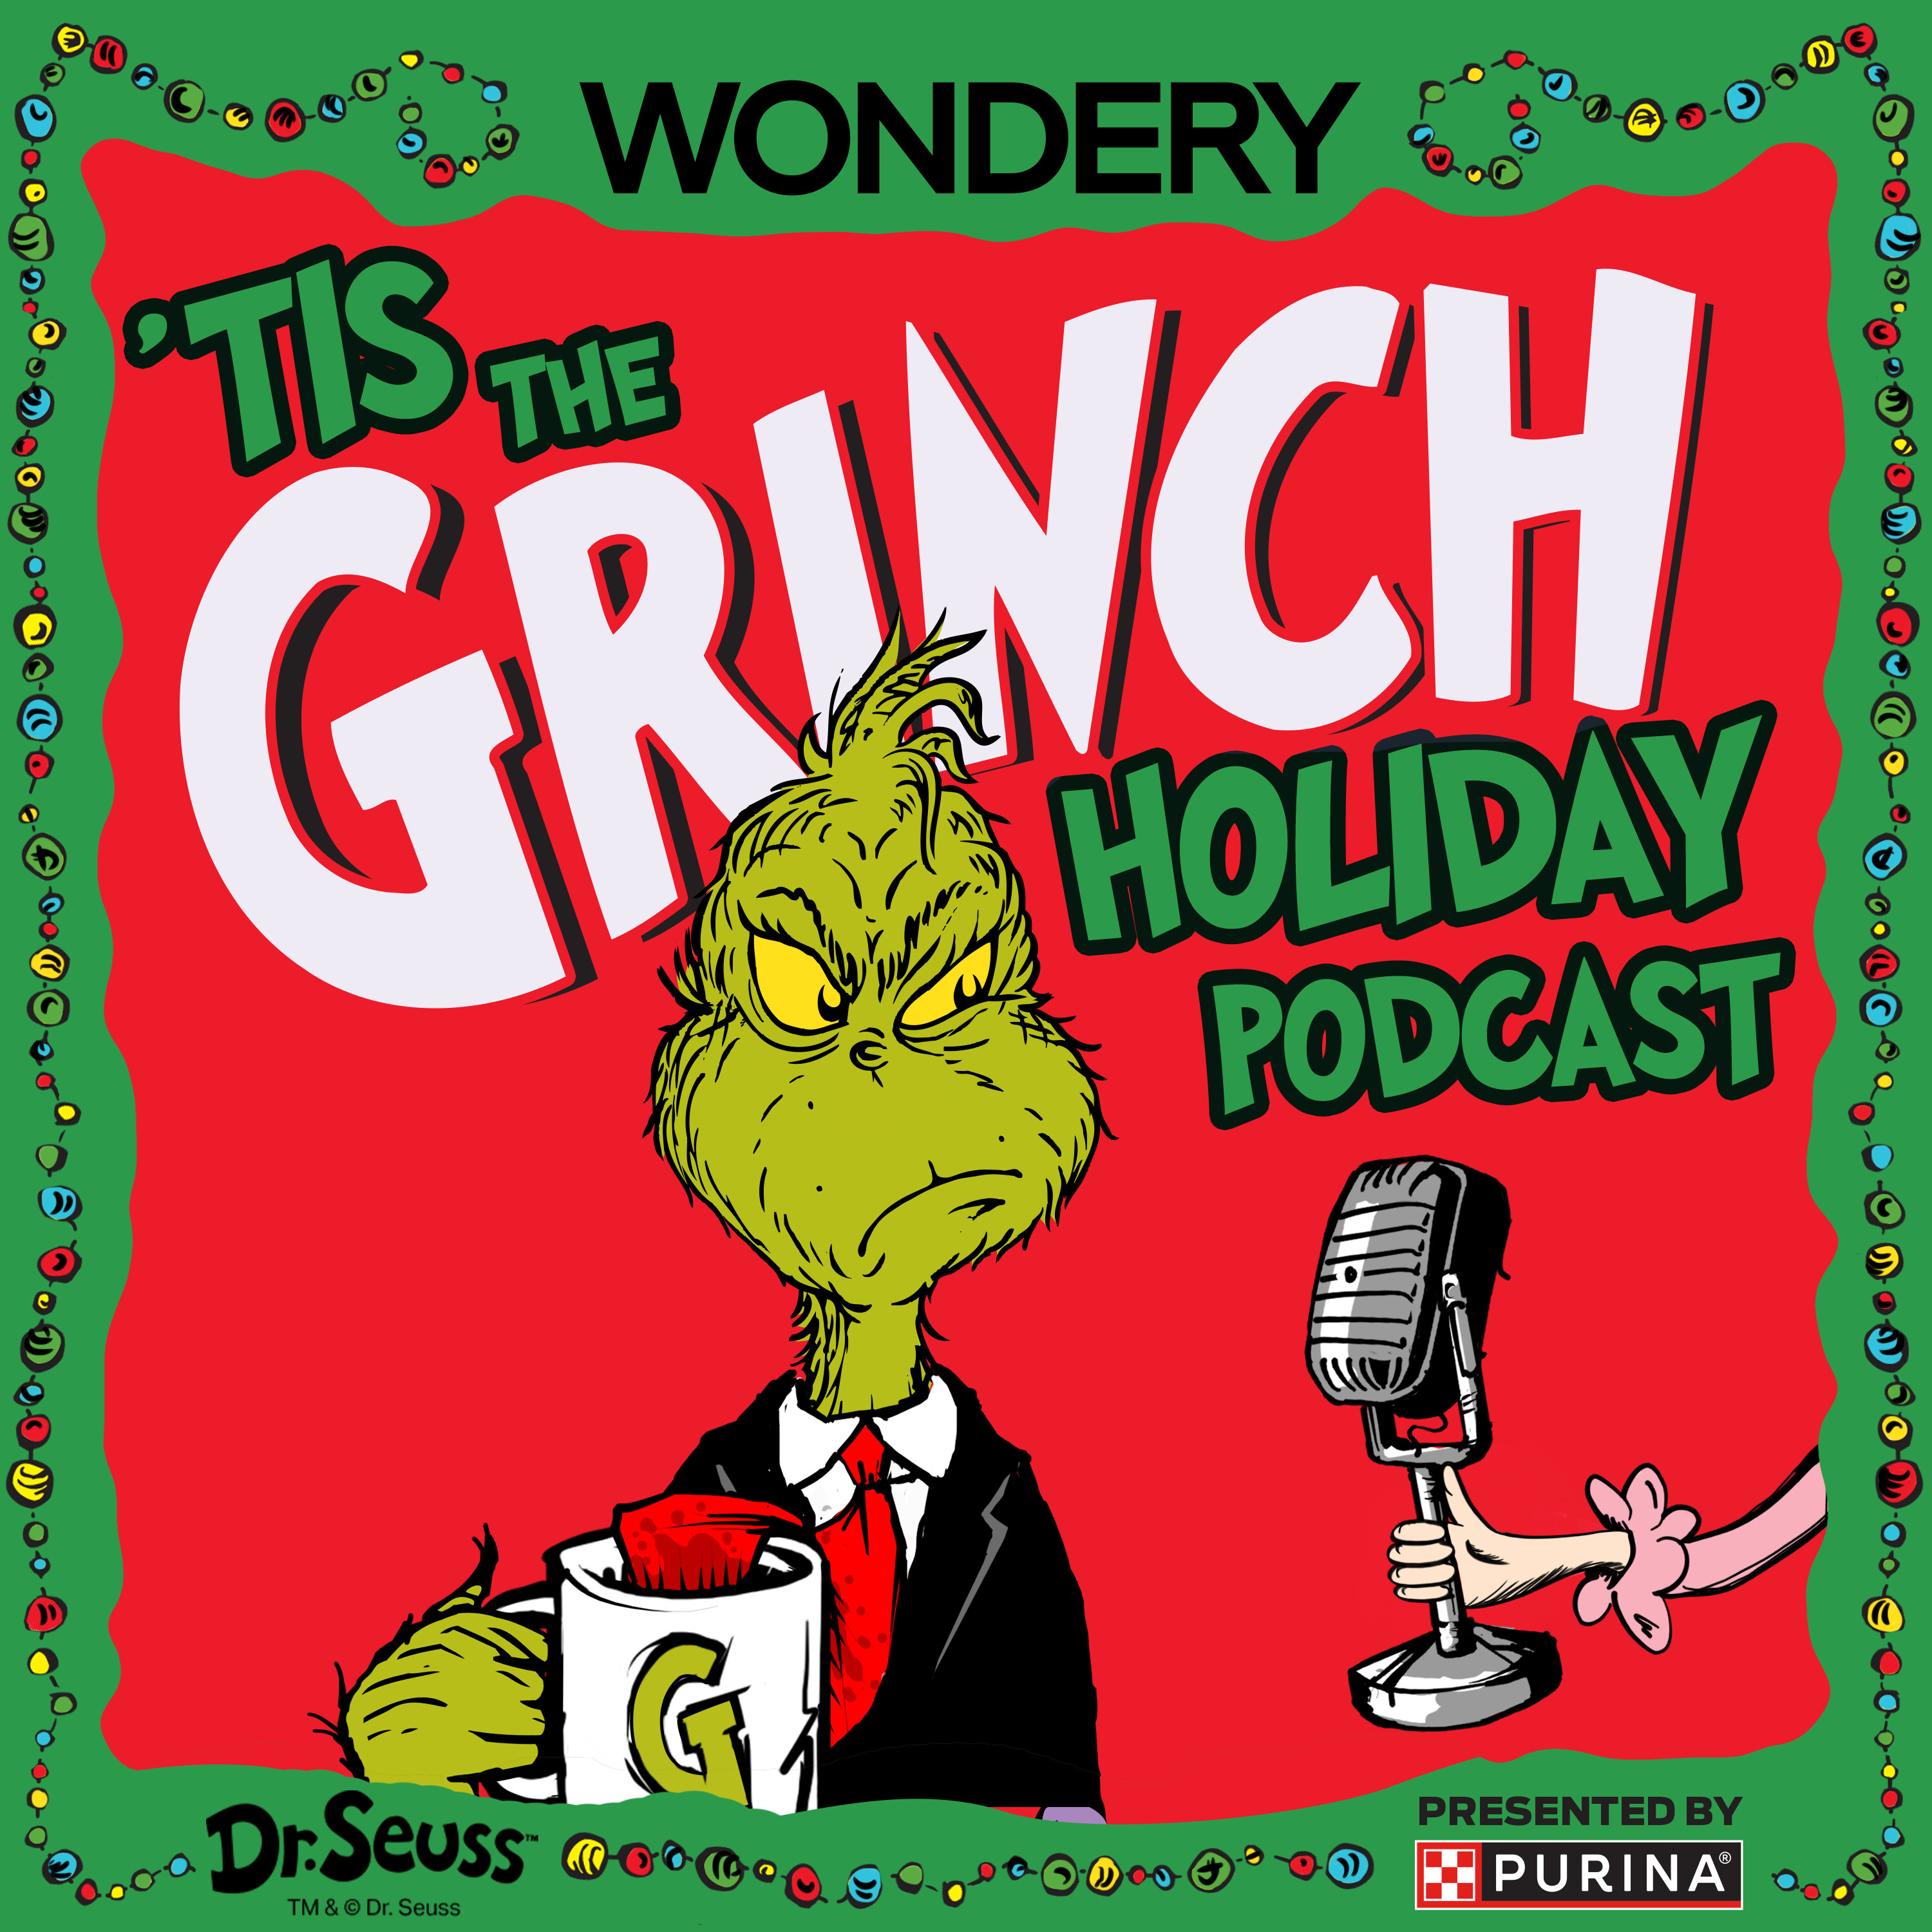 'Tis The Grinch Holiday Podcast podcast show image